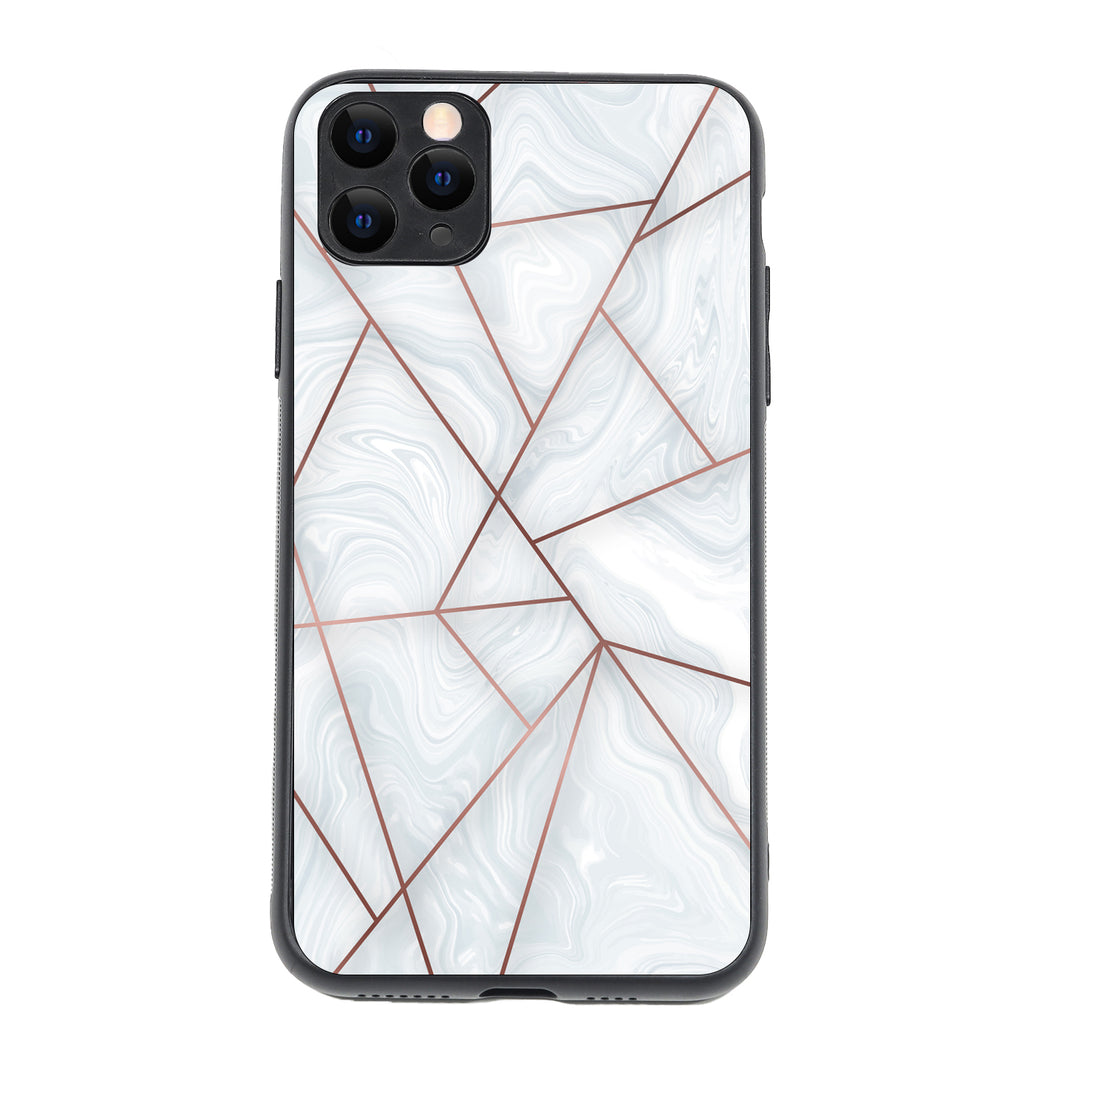 White Tile Marble iPhone 11 Pro Max Case